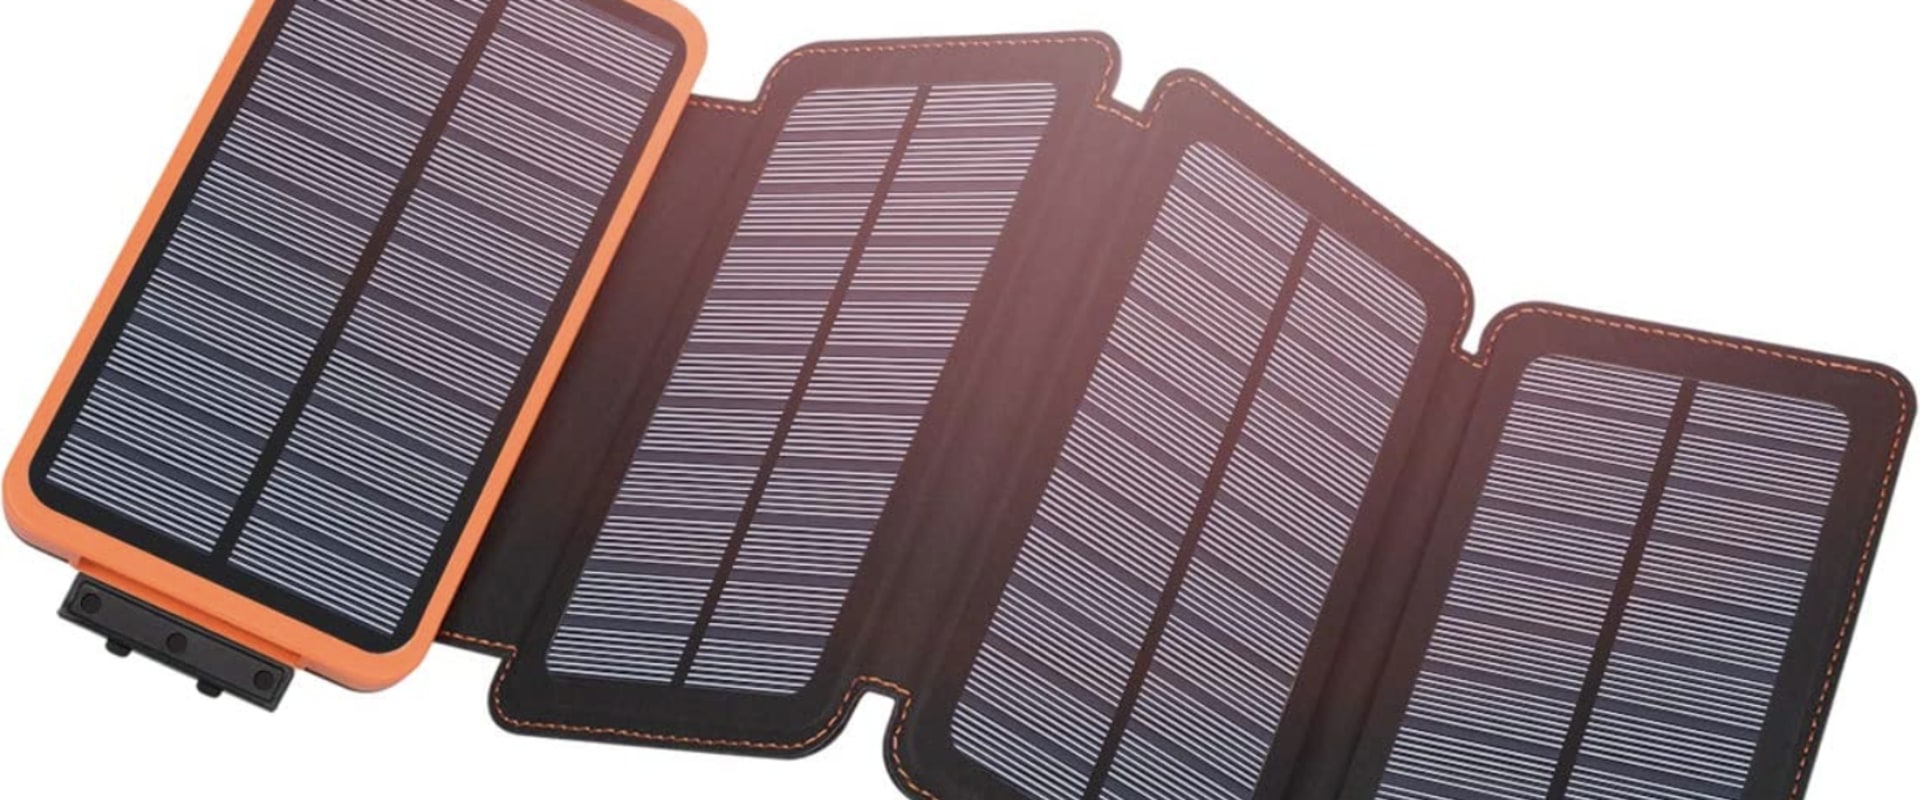 Which solar power bank is best?